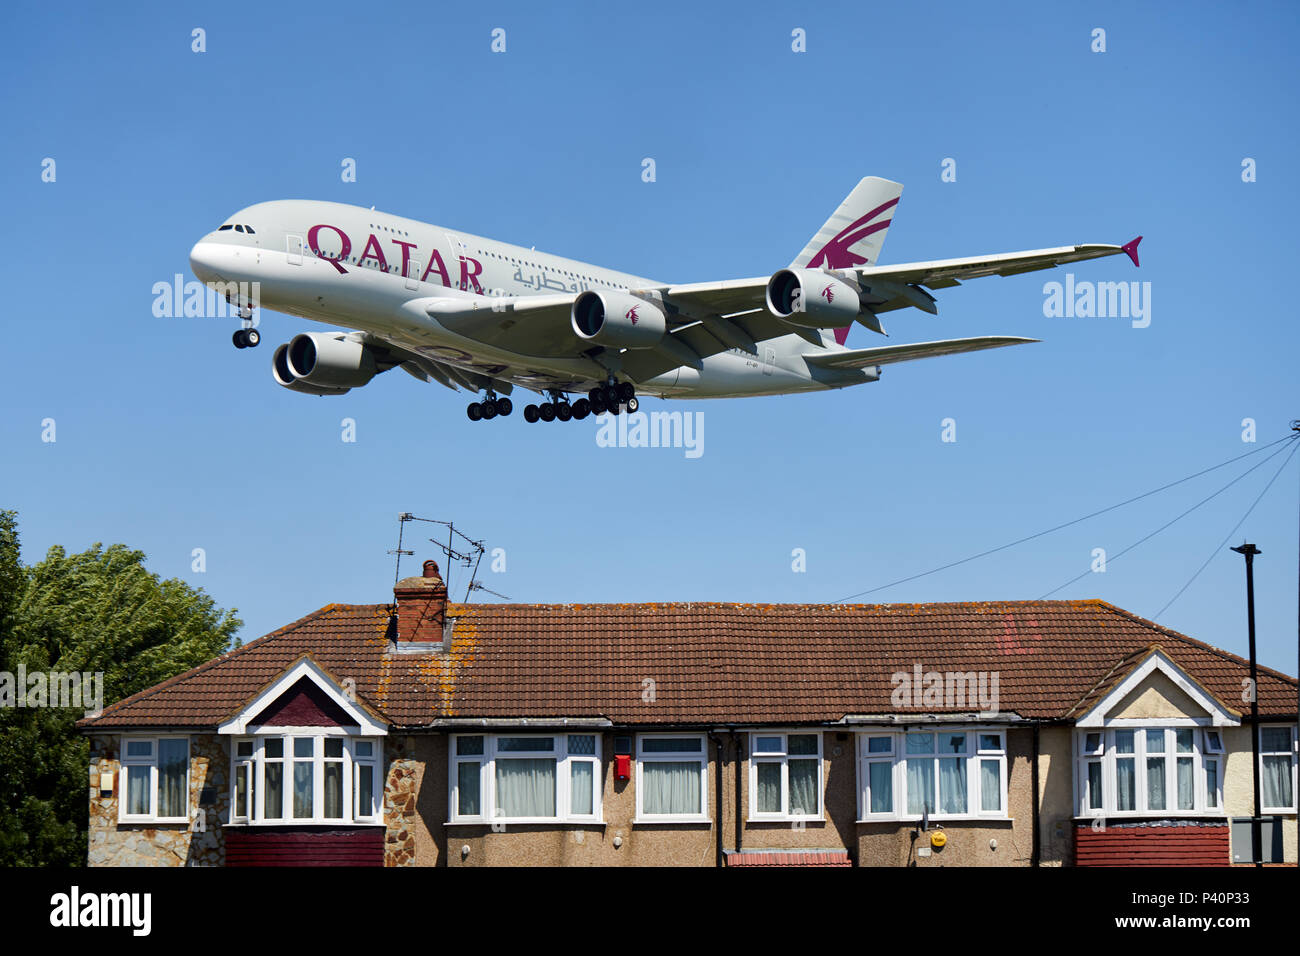 A Qatar Airways Airbus A380-800 aircraft, registration number A7-API, flying low over houses as it descends for a landing at Heathrow Airport, London. Stock Photo